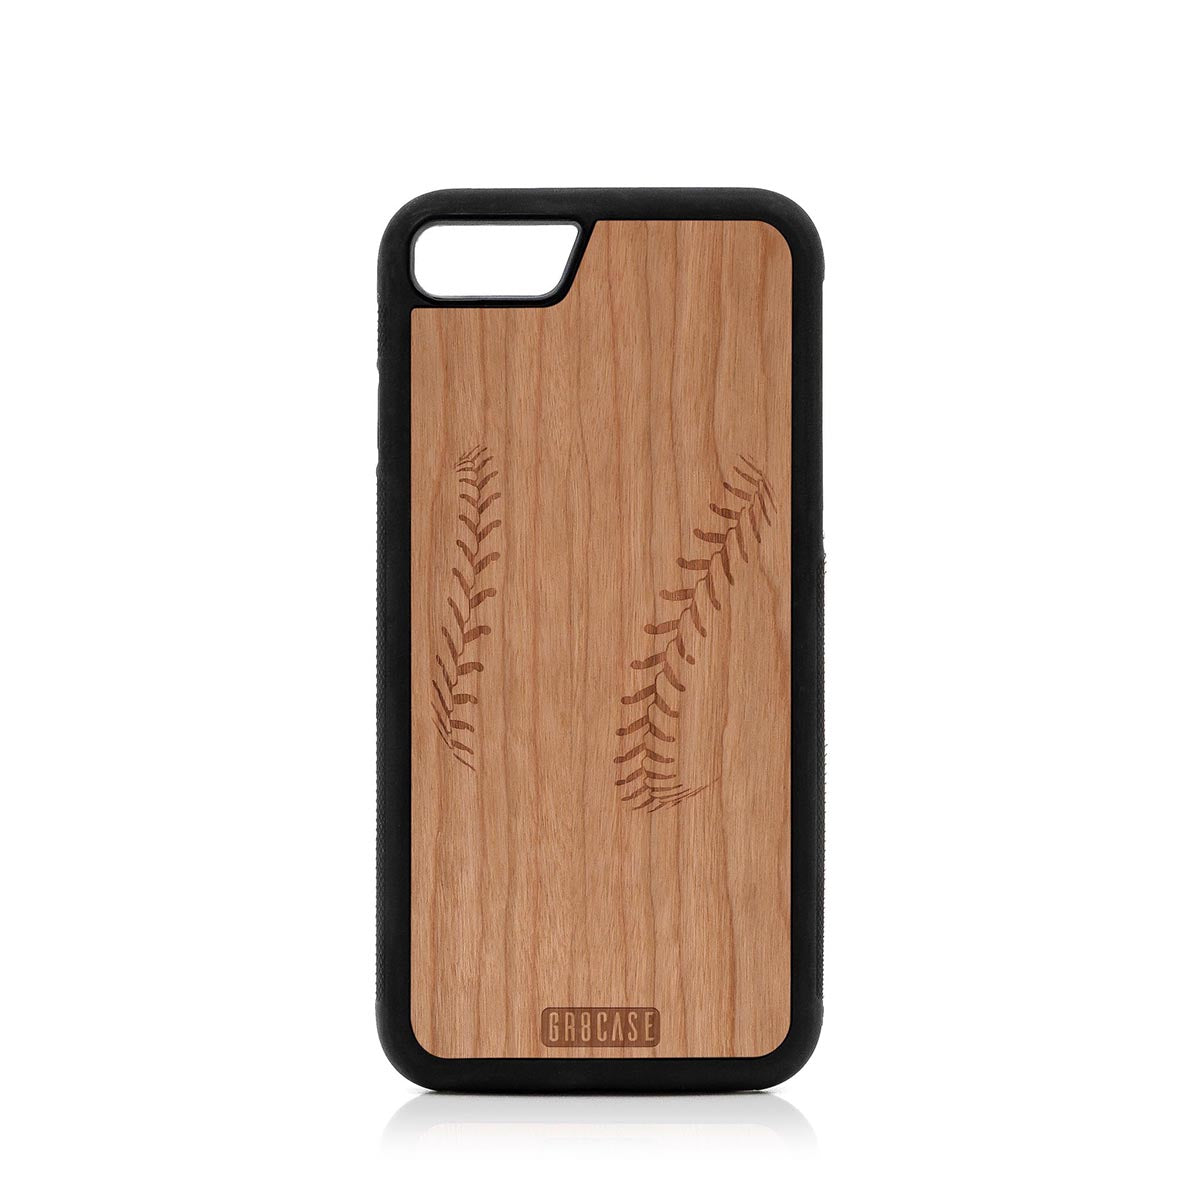 Baseball Stitches Design Wood Case For iPhone 7/8 by GR8CASE